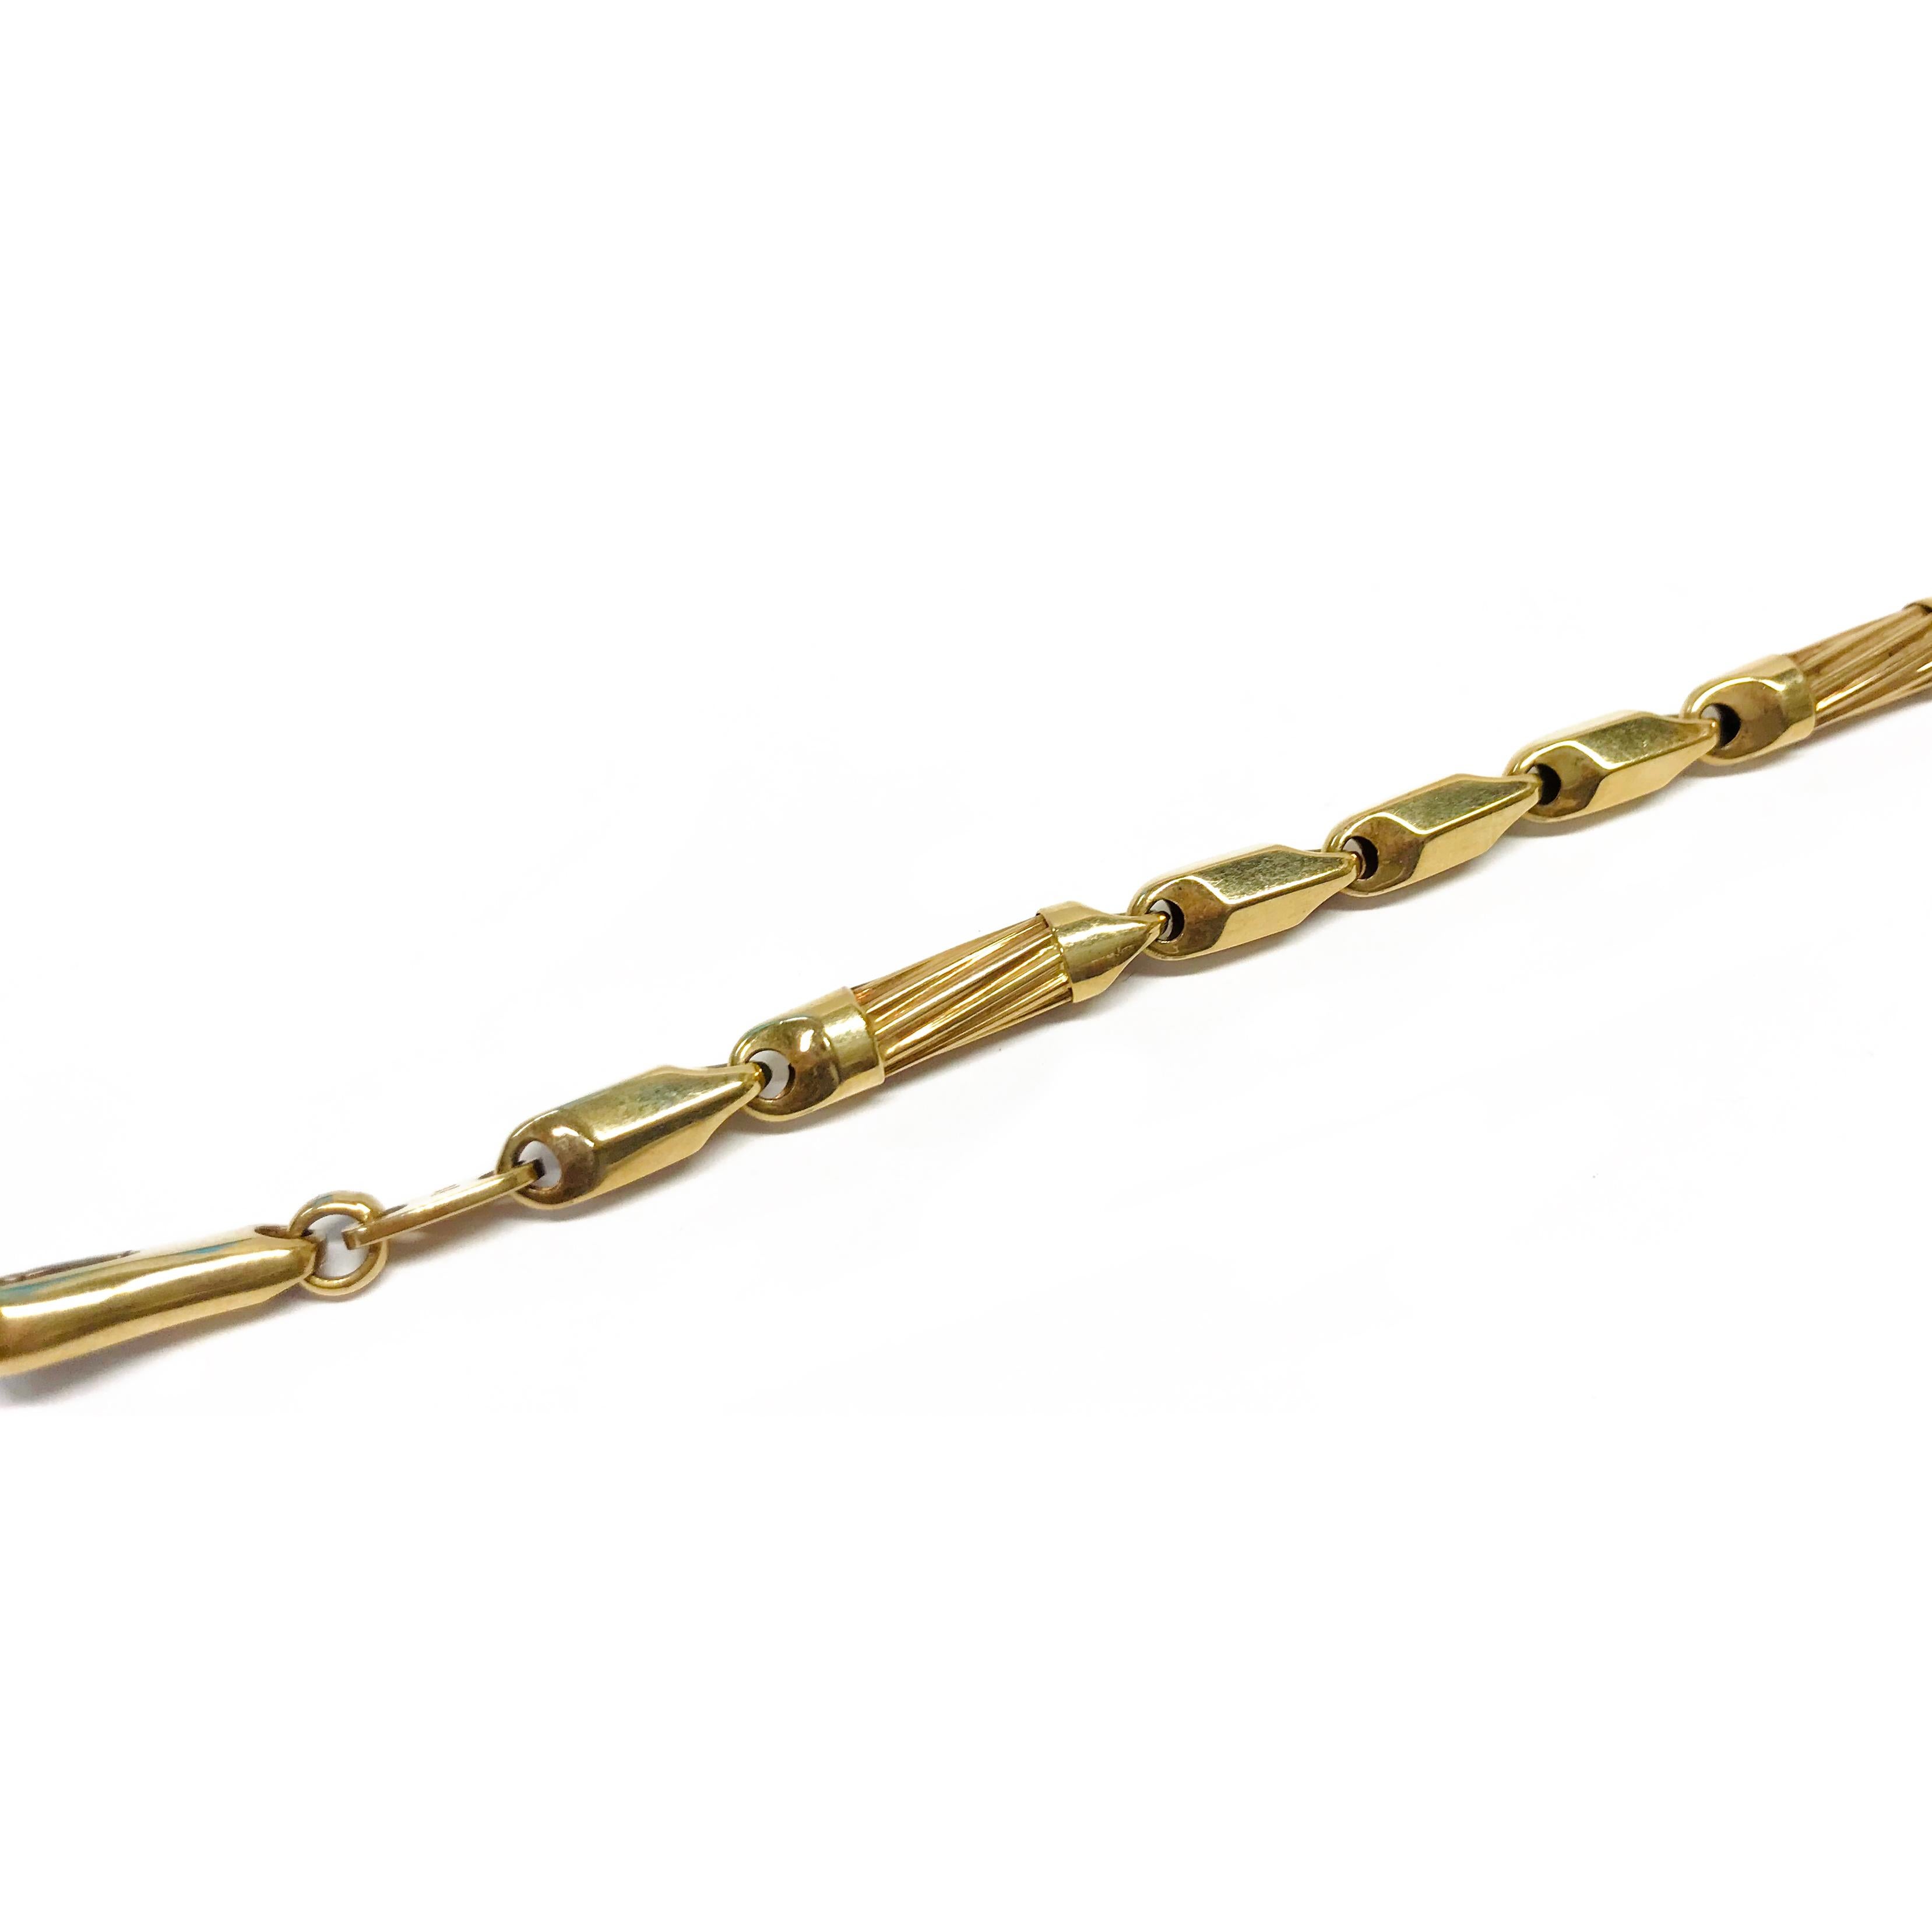 14 Karat Gold Tubular Link Bracelet. The bracelet is 5mm wide, has eleven links, eight are faceted with five sides, and three with angled ridges. Stamped on the inside of the clasp is 14K ITALY. The bracelet is 7.5